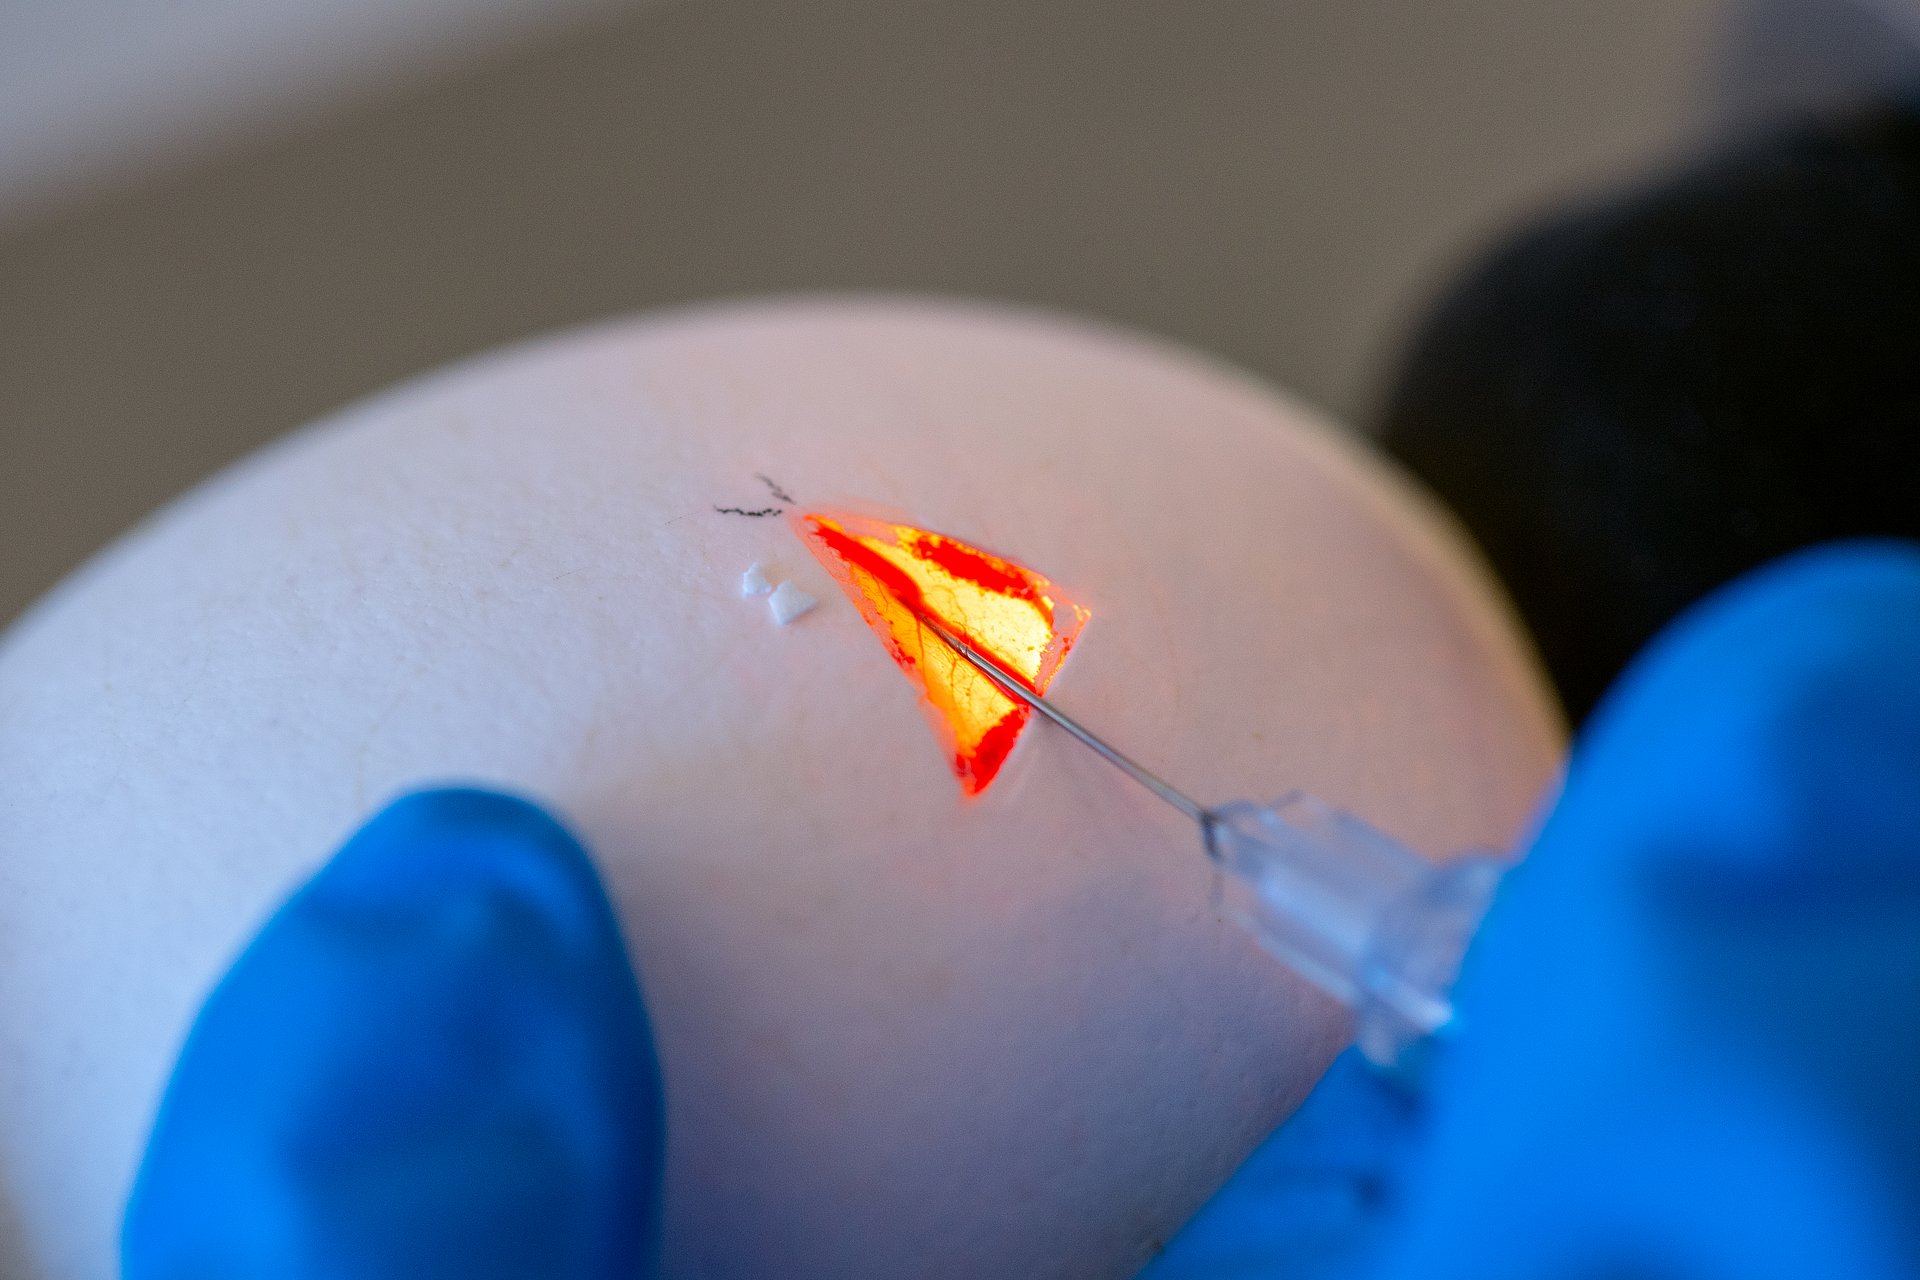 Scientists at TUM have created chickens and pigs with integrated genetic scissors. This can be used at all stages of the animals' development. They have already demonstrated applications in chicken embryos (image) as well as in living pigs.